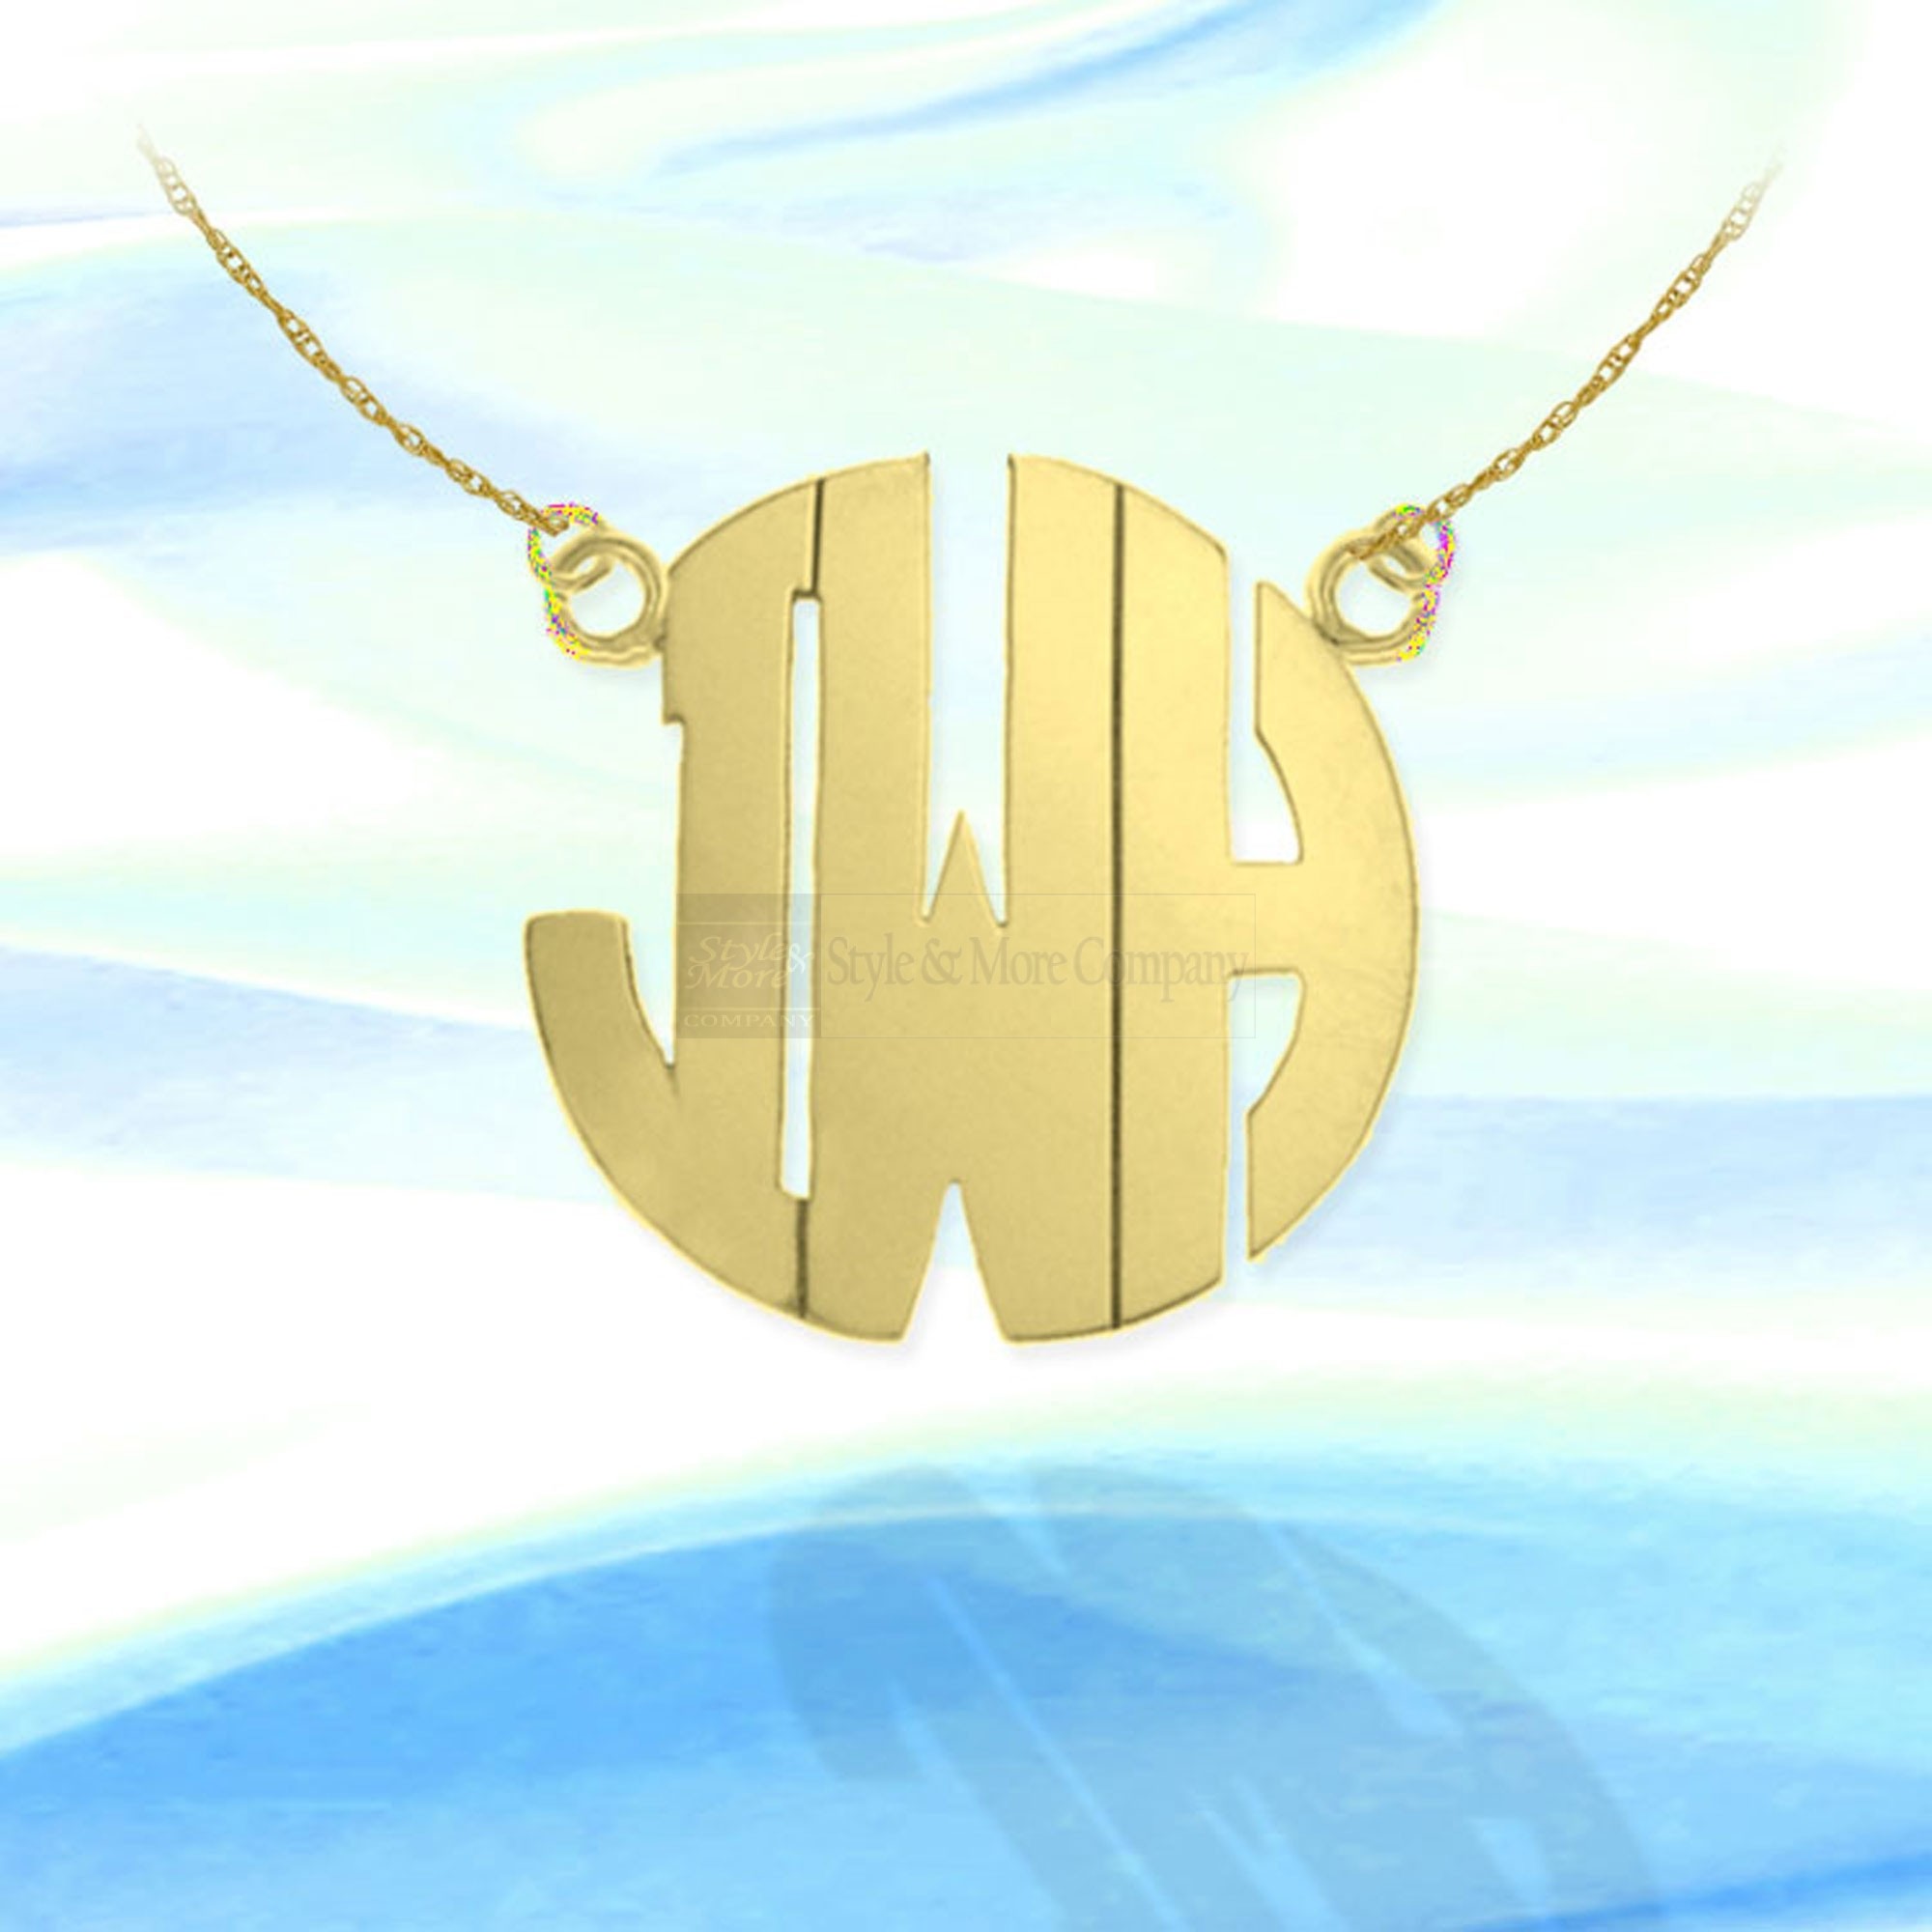 1 1/4 inch 24K Gold Plated Sterling Silver Handcrafted Cutout Personalized Initial Necklace